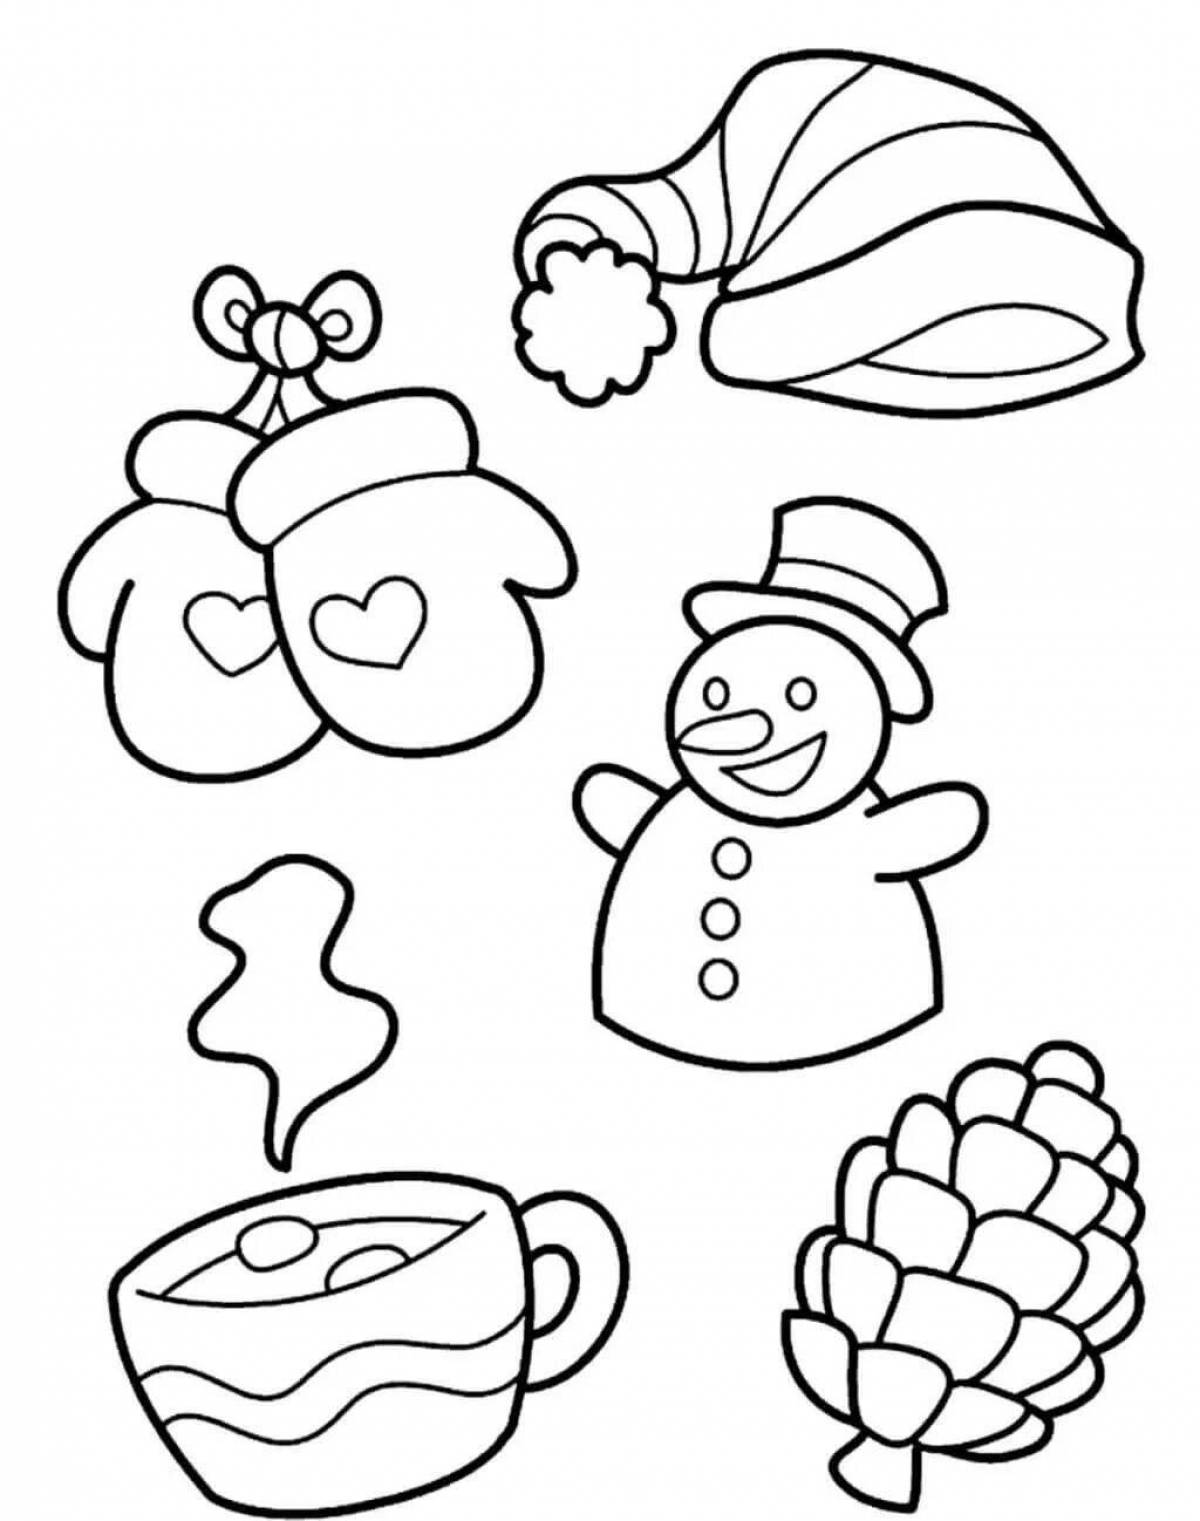 Fantastic winter coloring book for 2-3 year olds